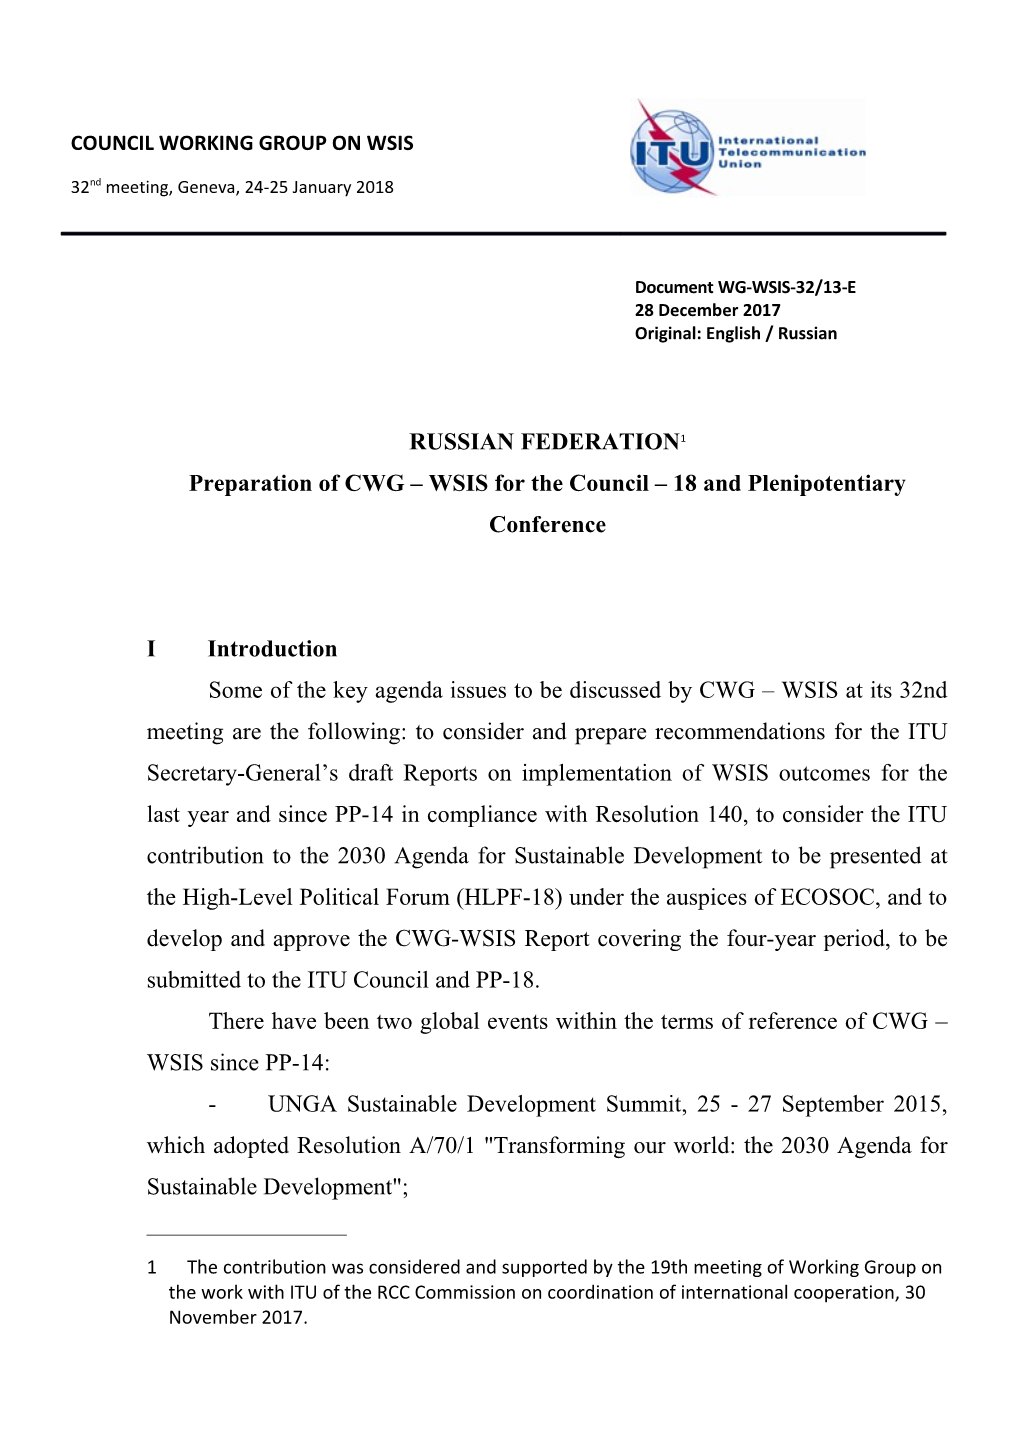 Preparation of CWG WSIS for the Council 18 and Plenipotentiary Conference